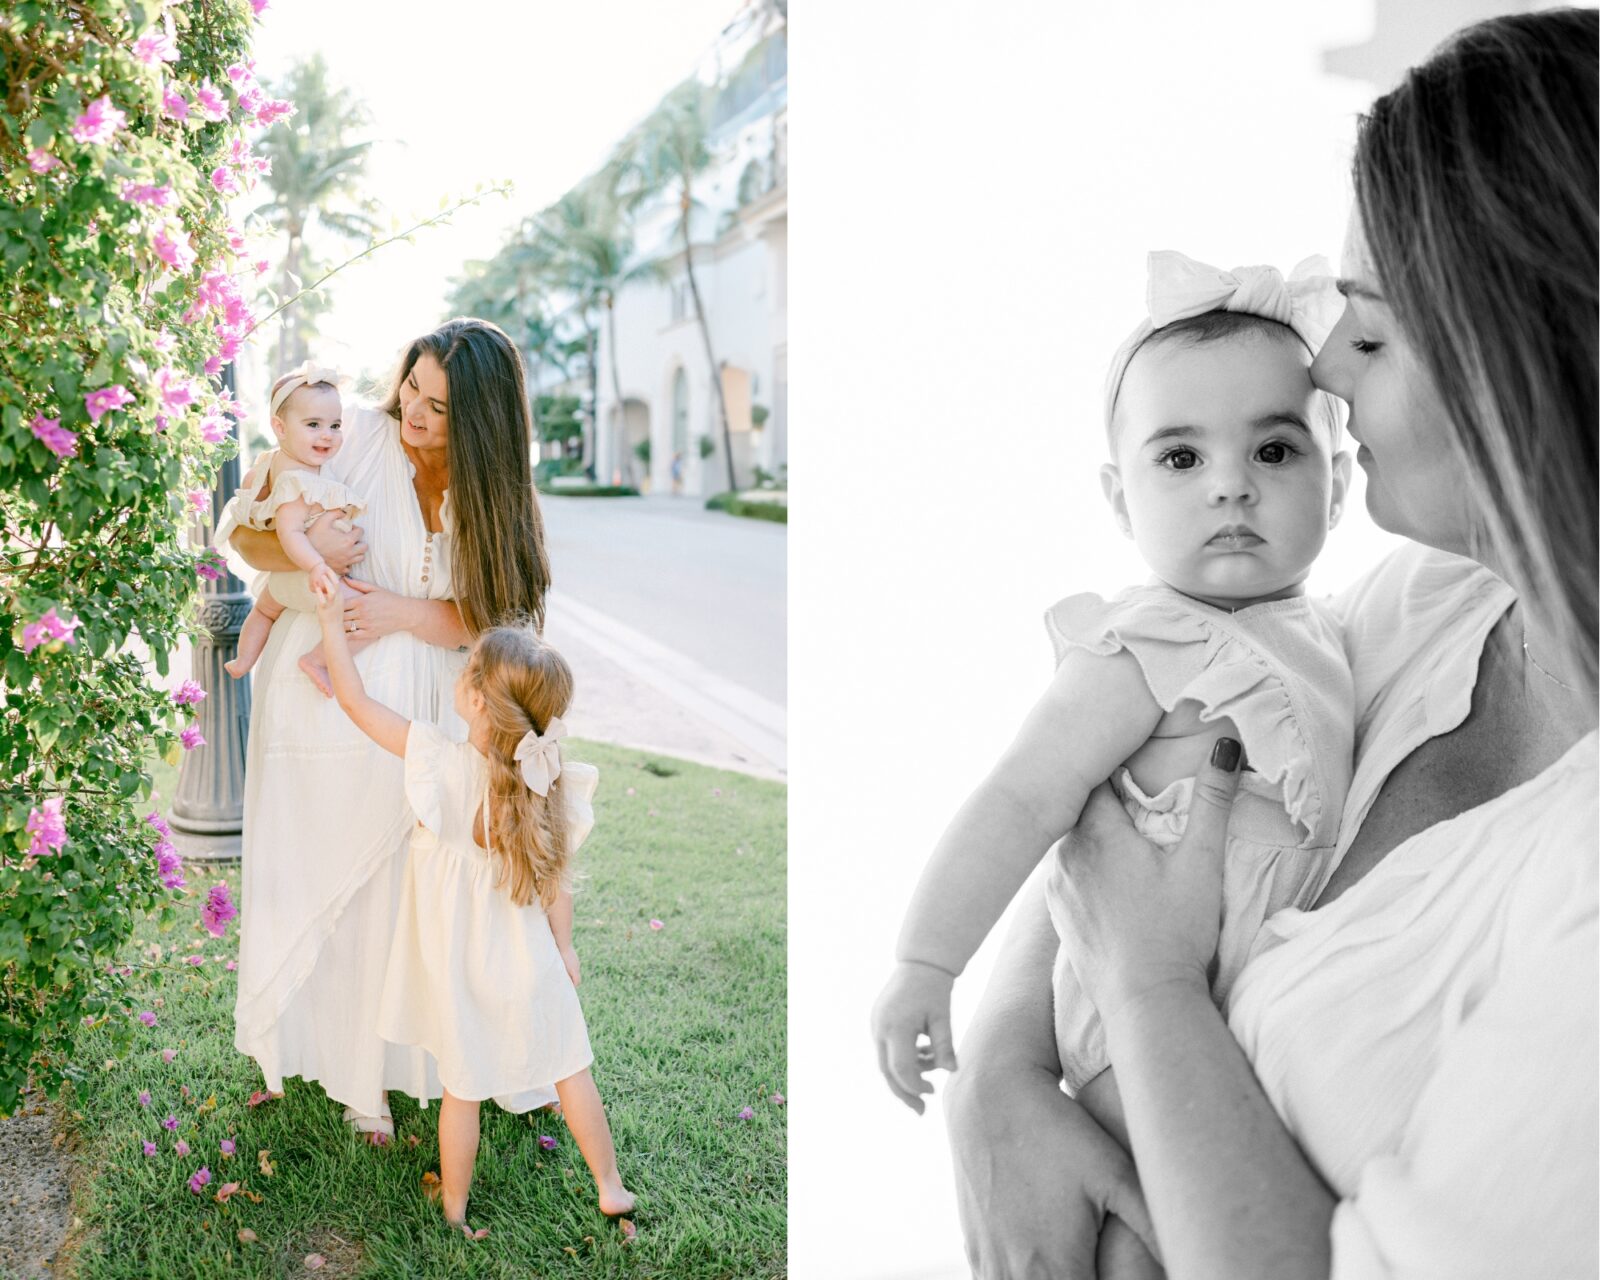 Mom snuggling with her daughter in a green area with flowers during her Miami family photoshoot